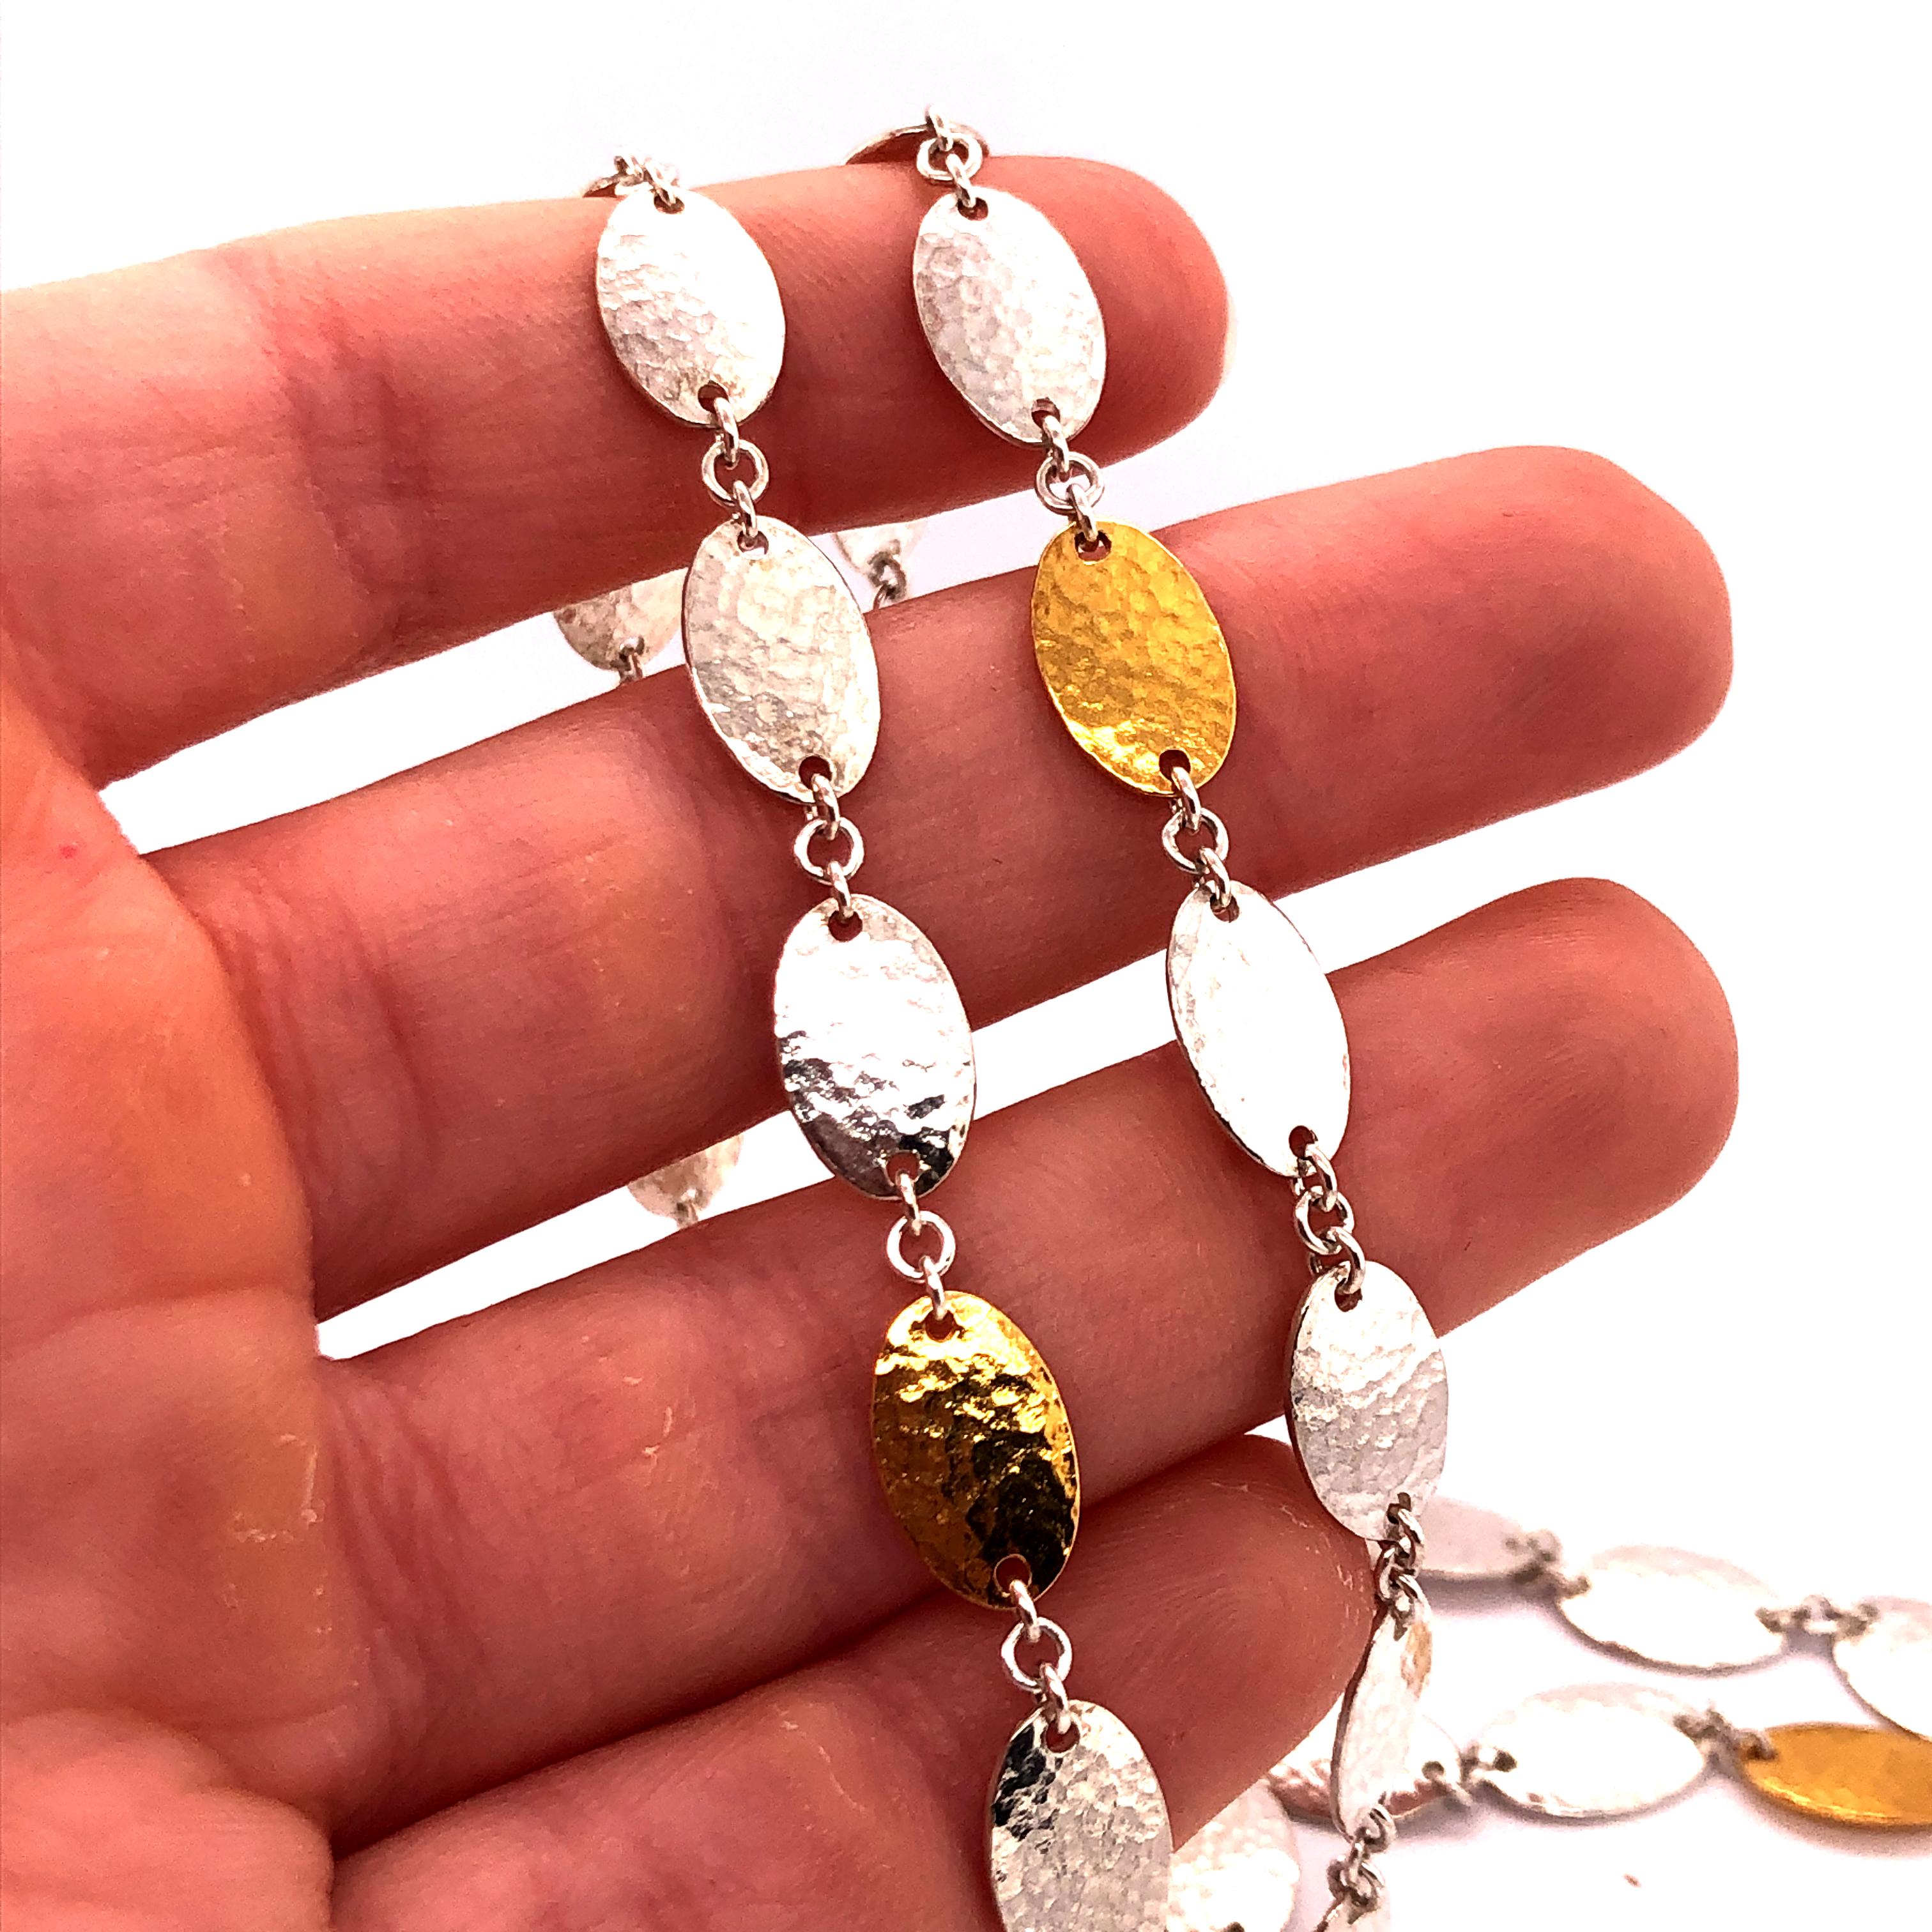 Sterling Silver & 24KY Mango Flake Necklace. 36 inches long.

Stamped: Gurhan, 925, 24k G. P.